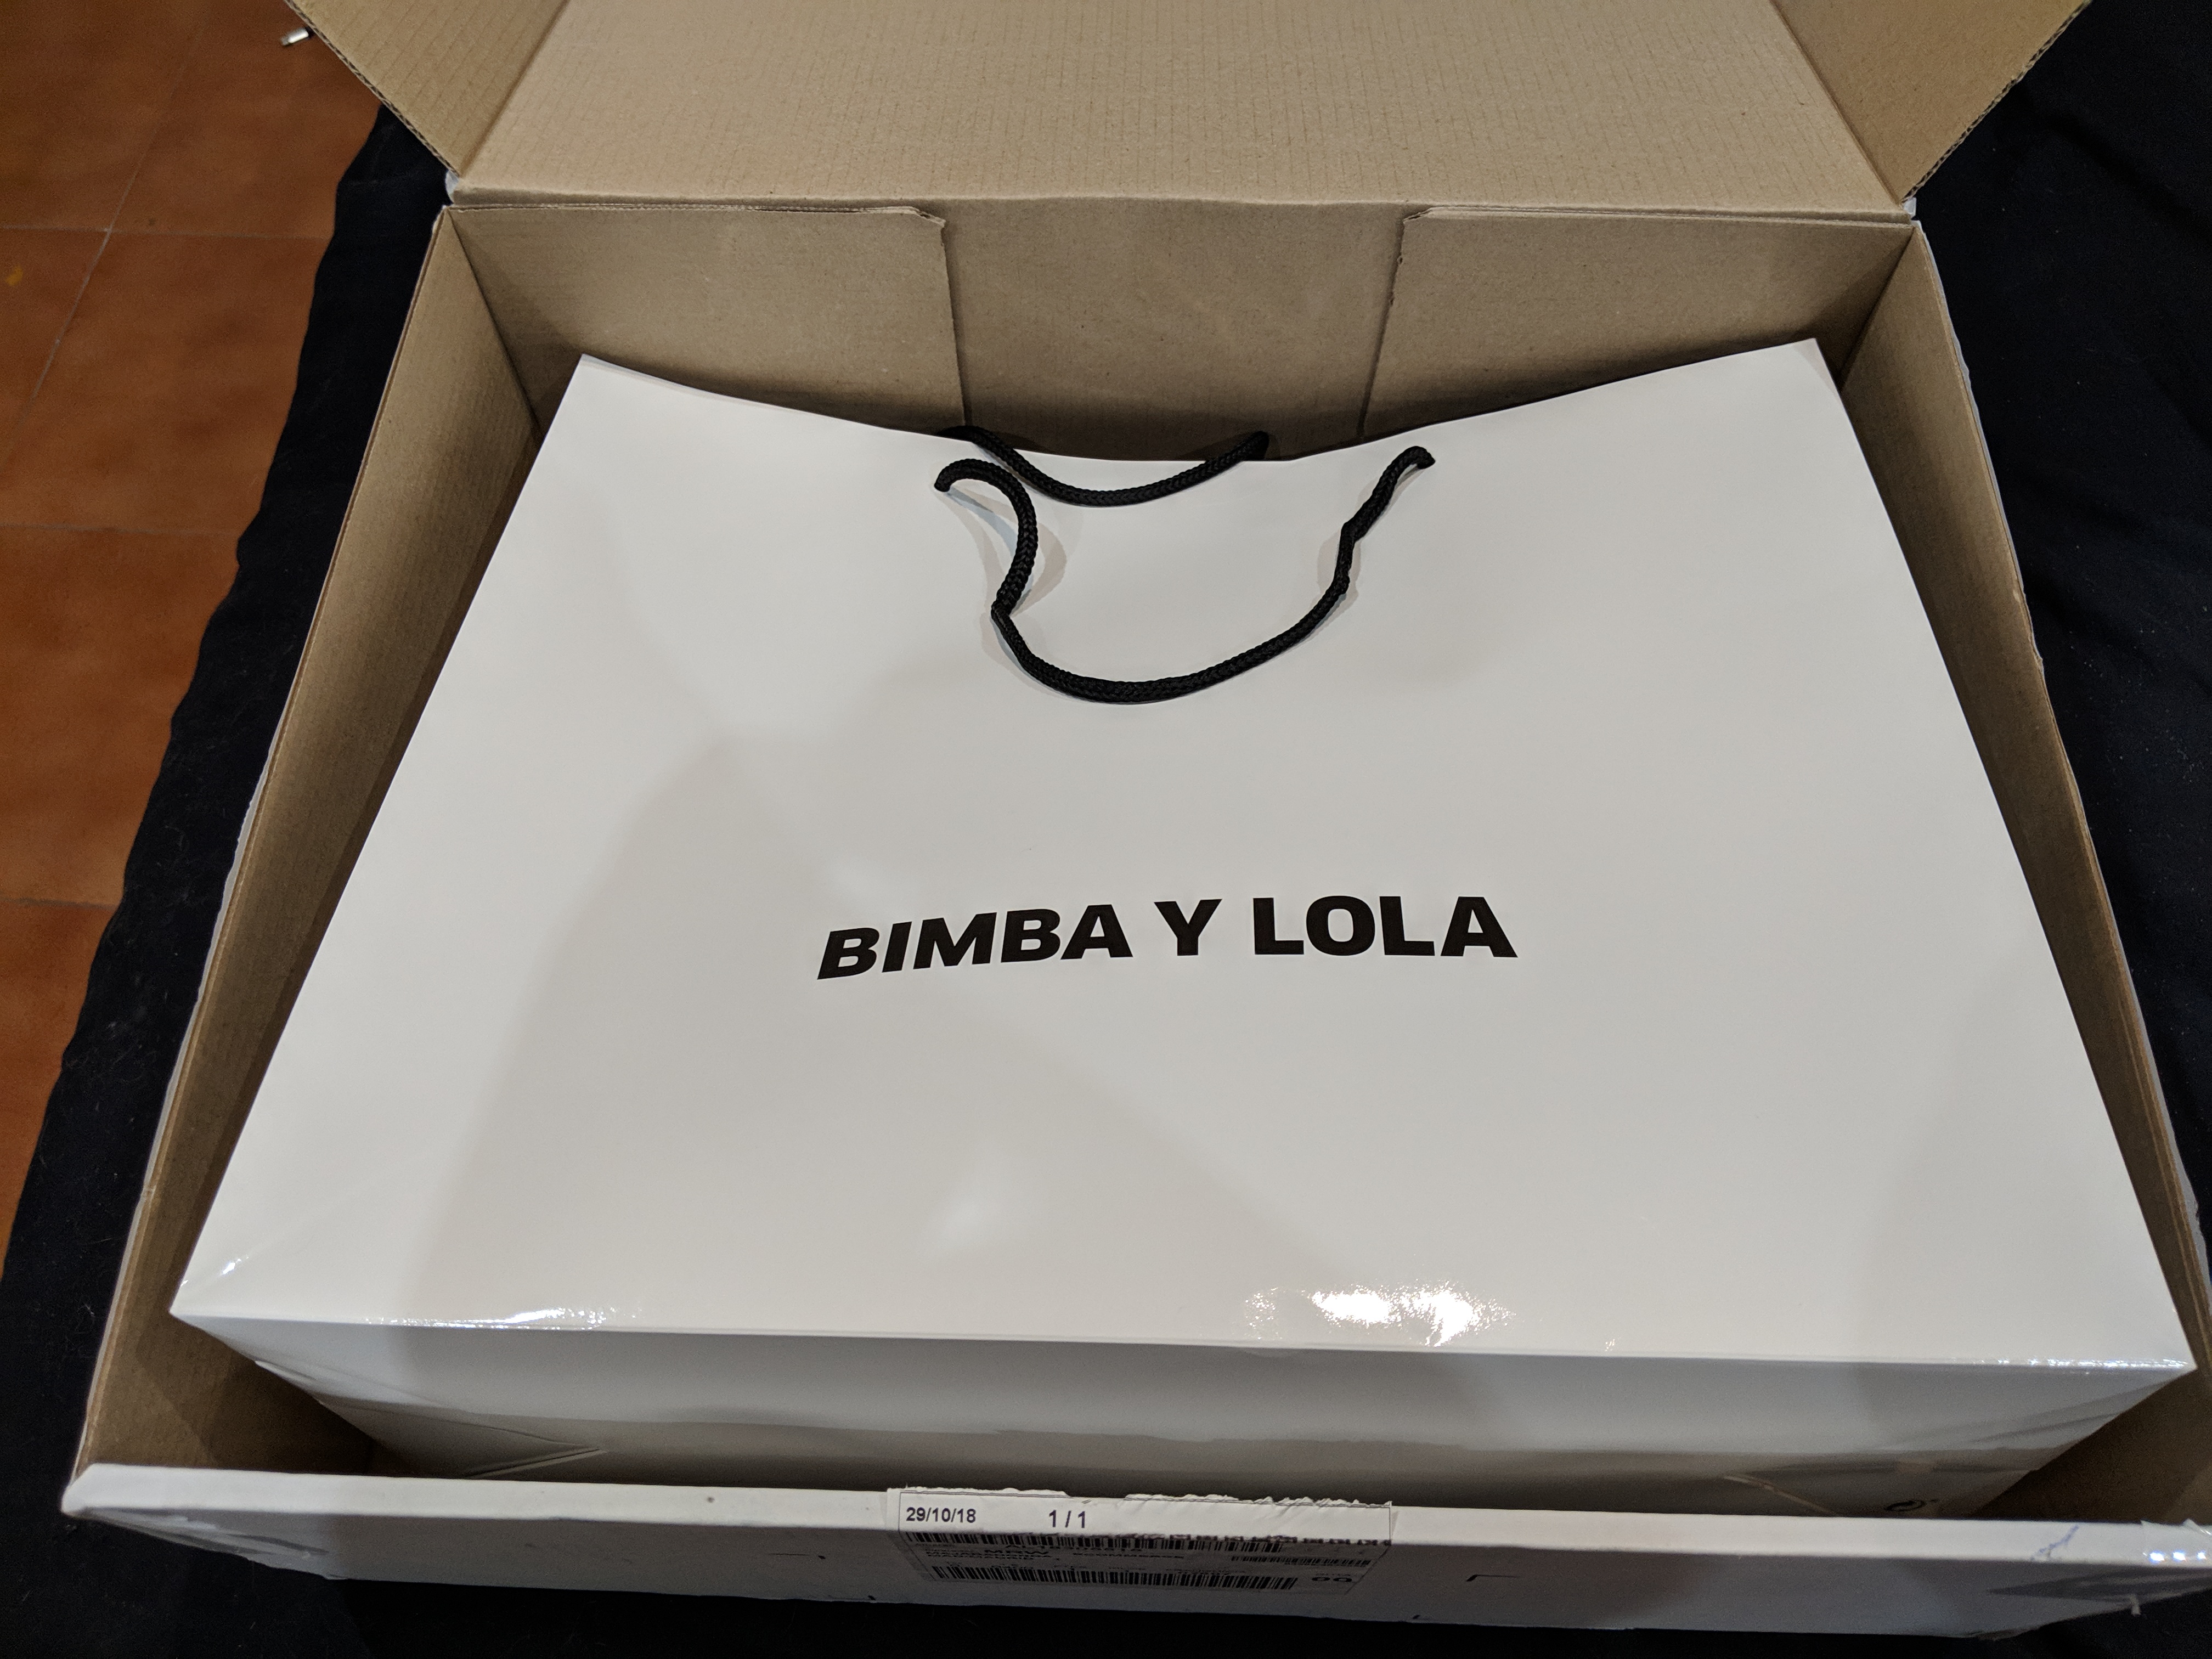 Delivery from BIMBA Y LOLA Spain - International delivery service Ukraine  Express